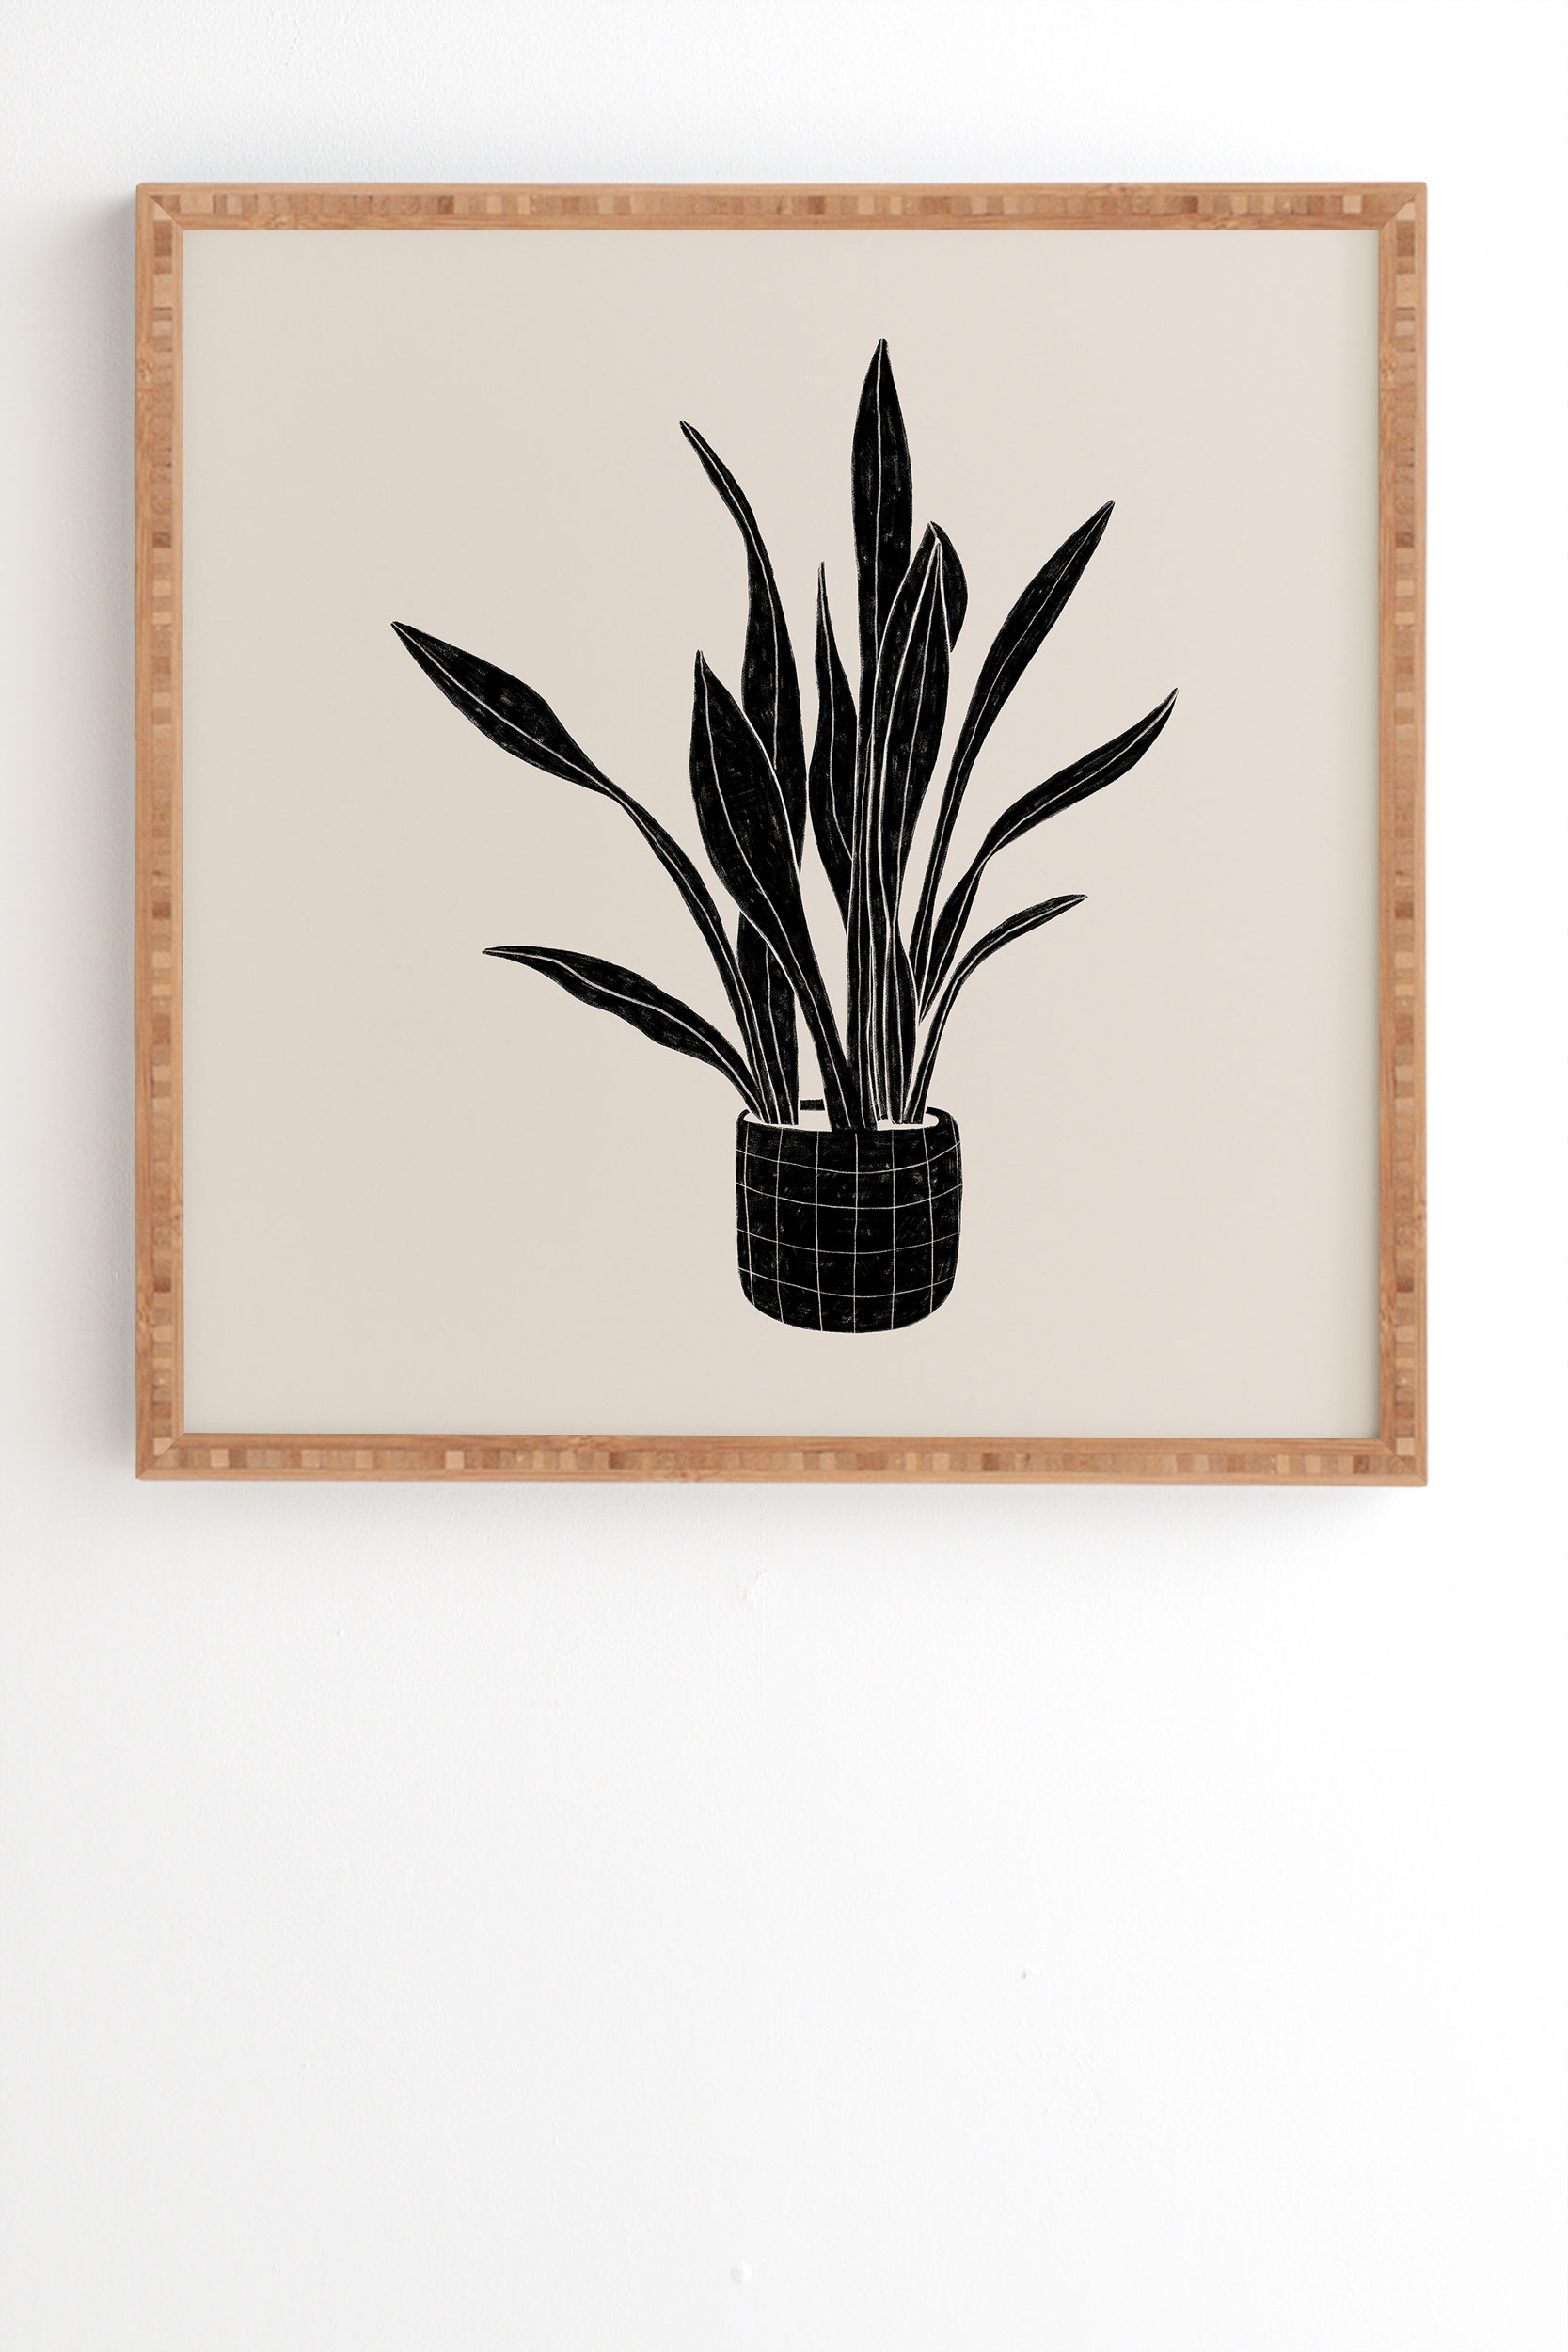 Black And White Snake Plant by Alisa Galitsyna - Framed Wall Art Bamboo 20" x 20" - Image 1